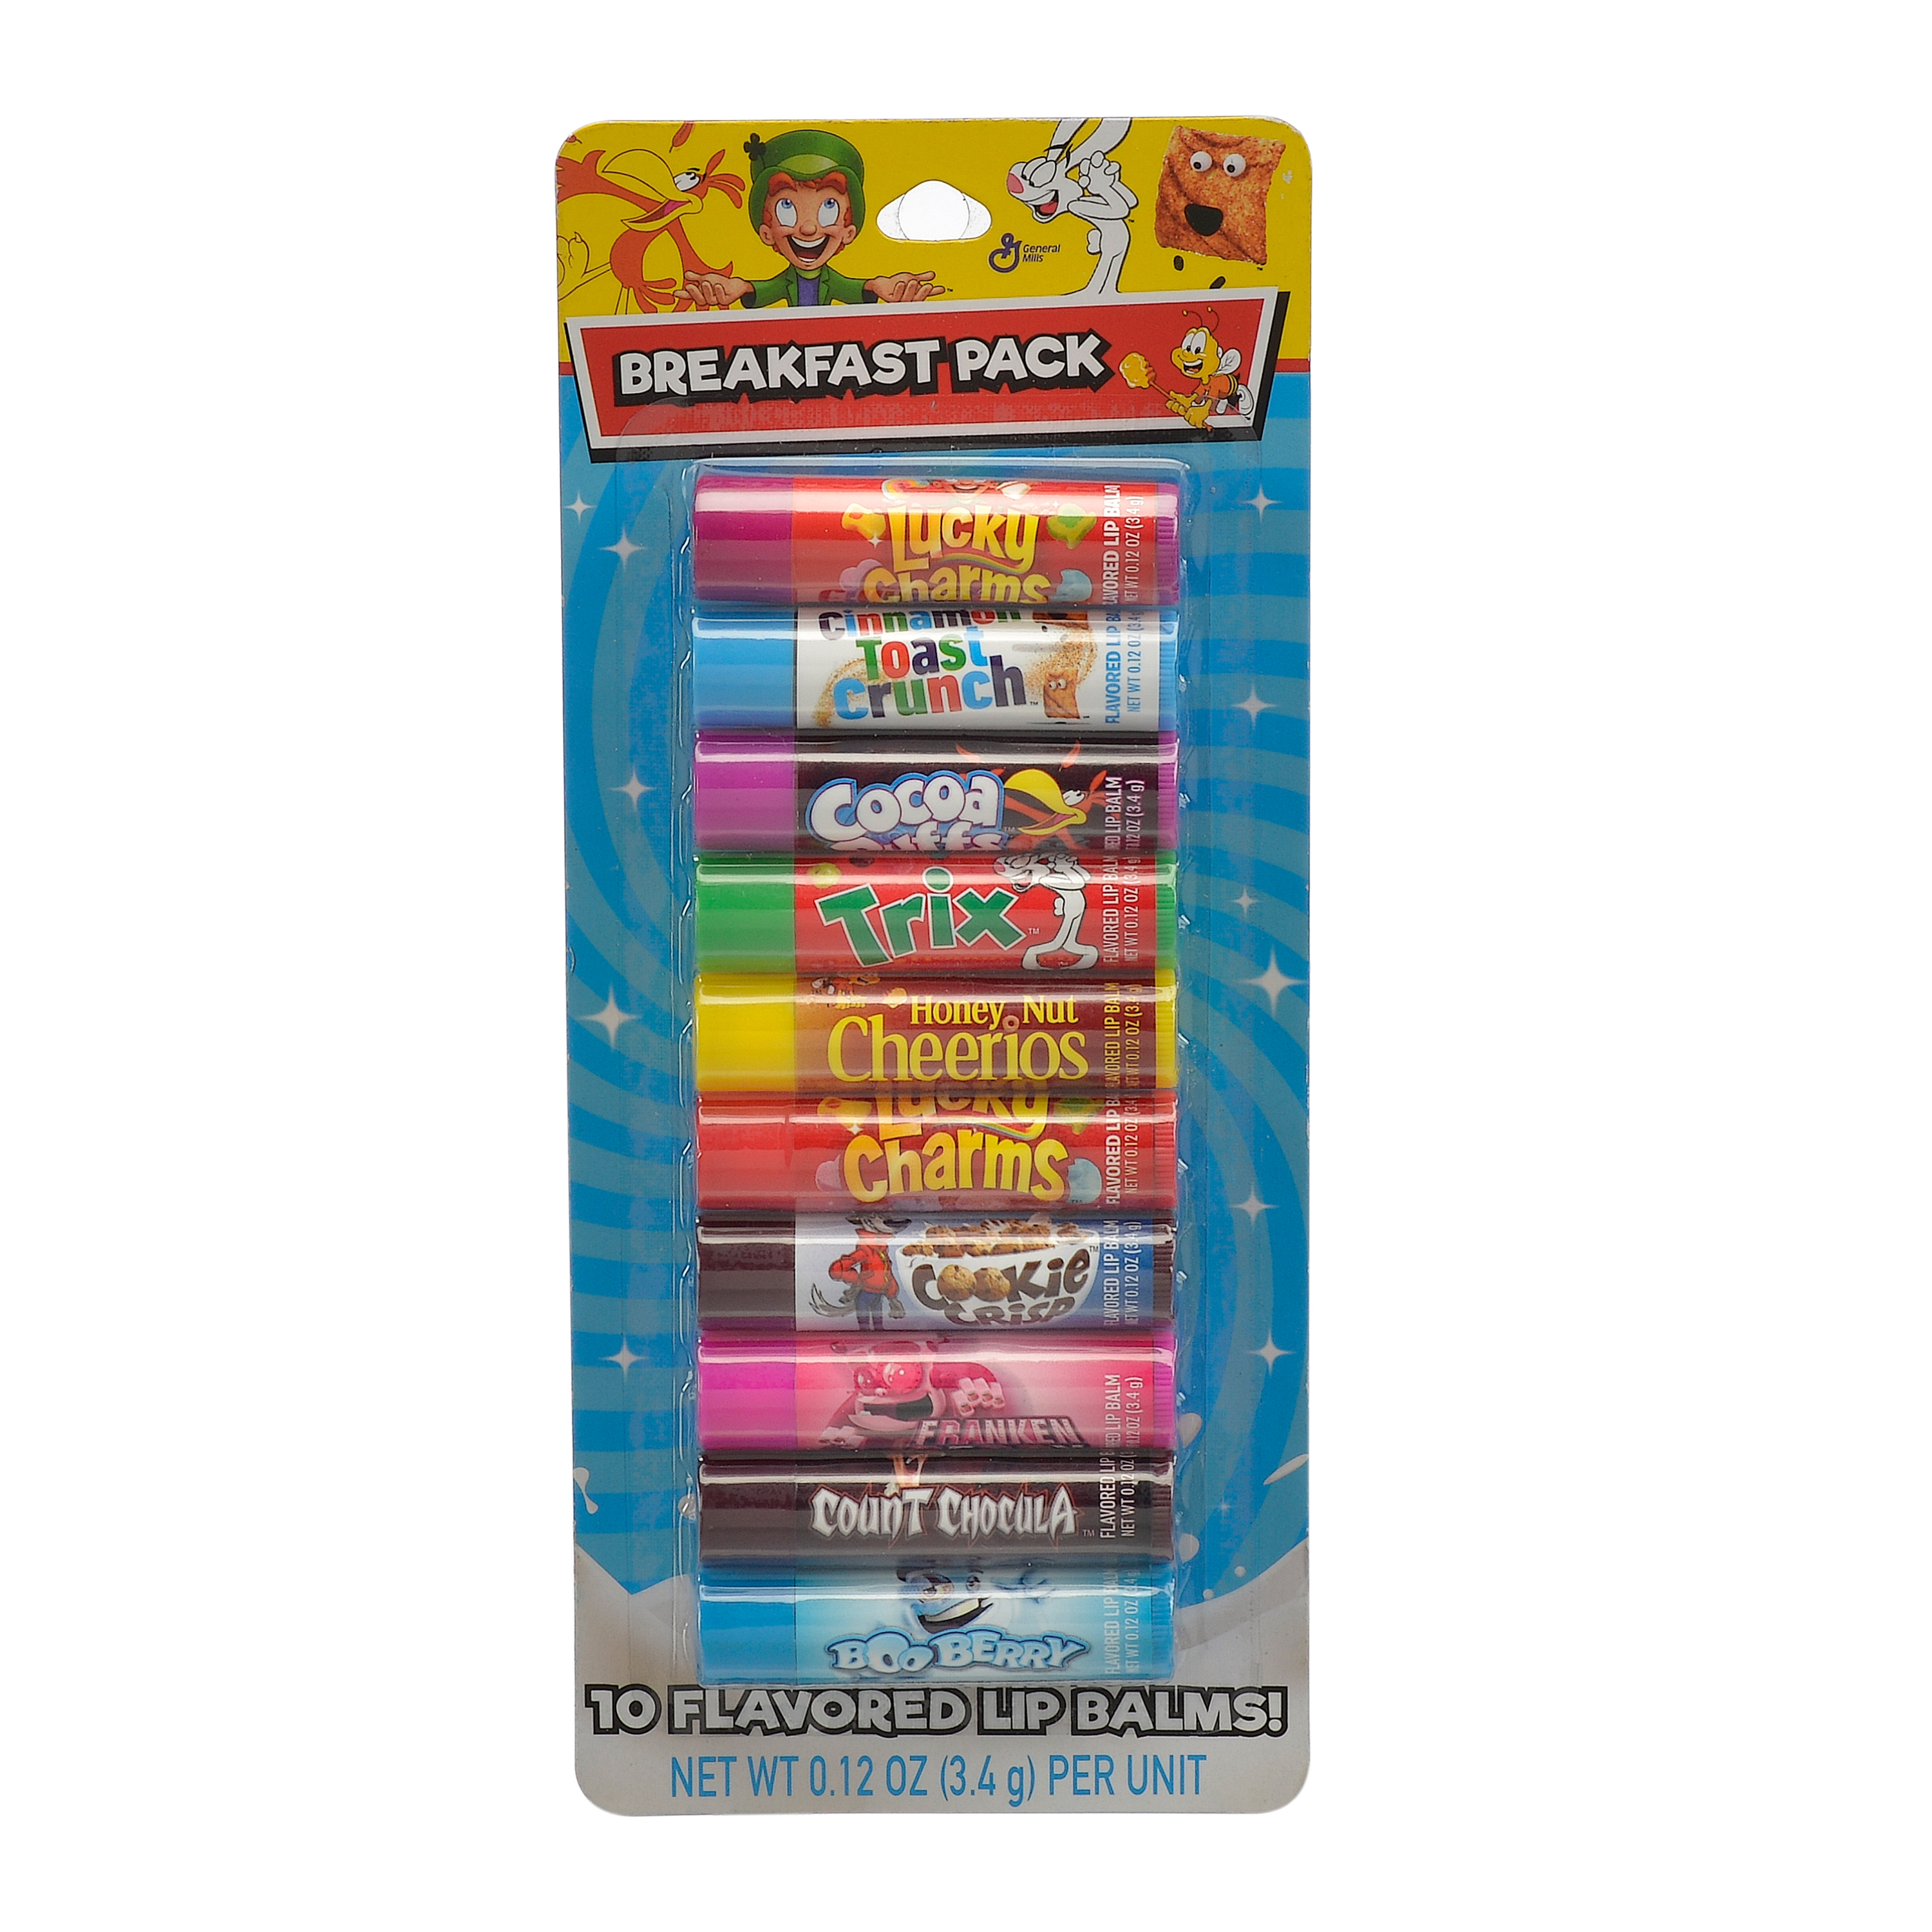 General Mills Breakfast Pack Cereal Flavored Lip Balm, 10 Pieces ($9.99 Value) - image 3 of 4